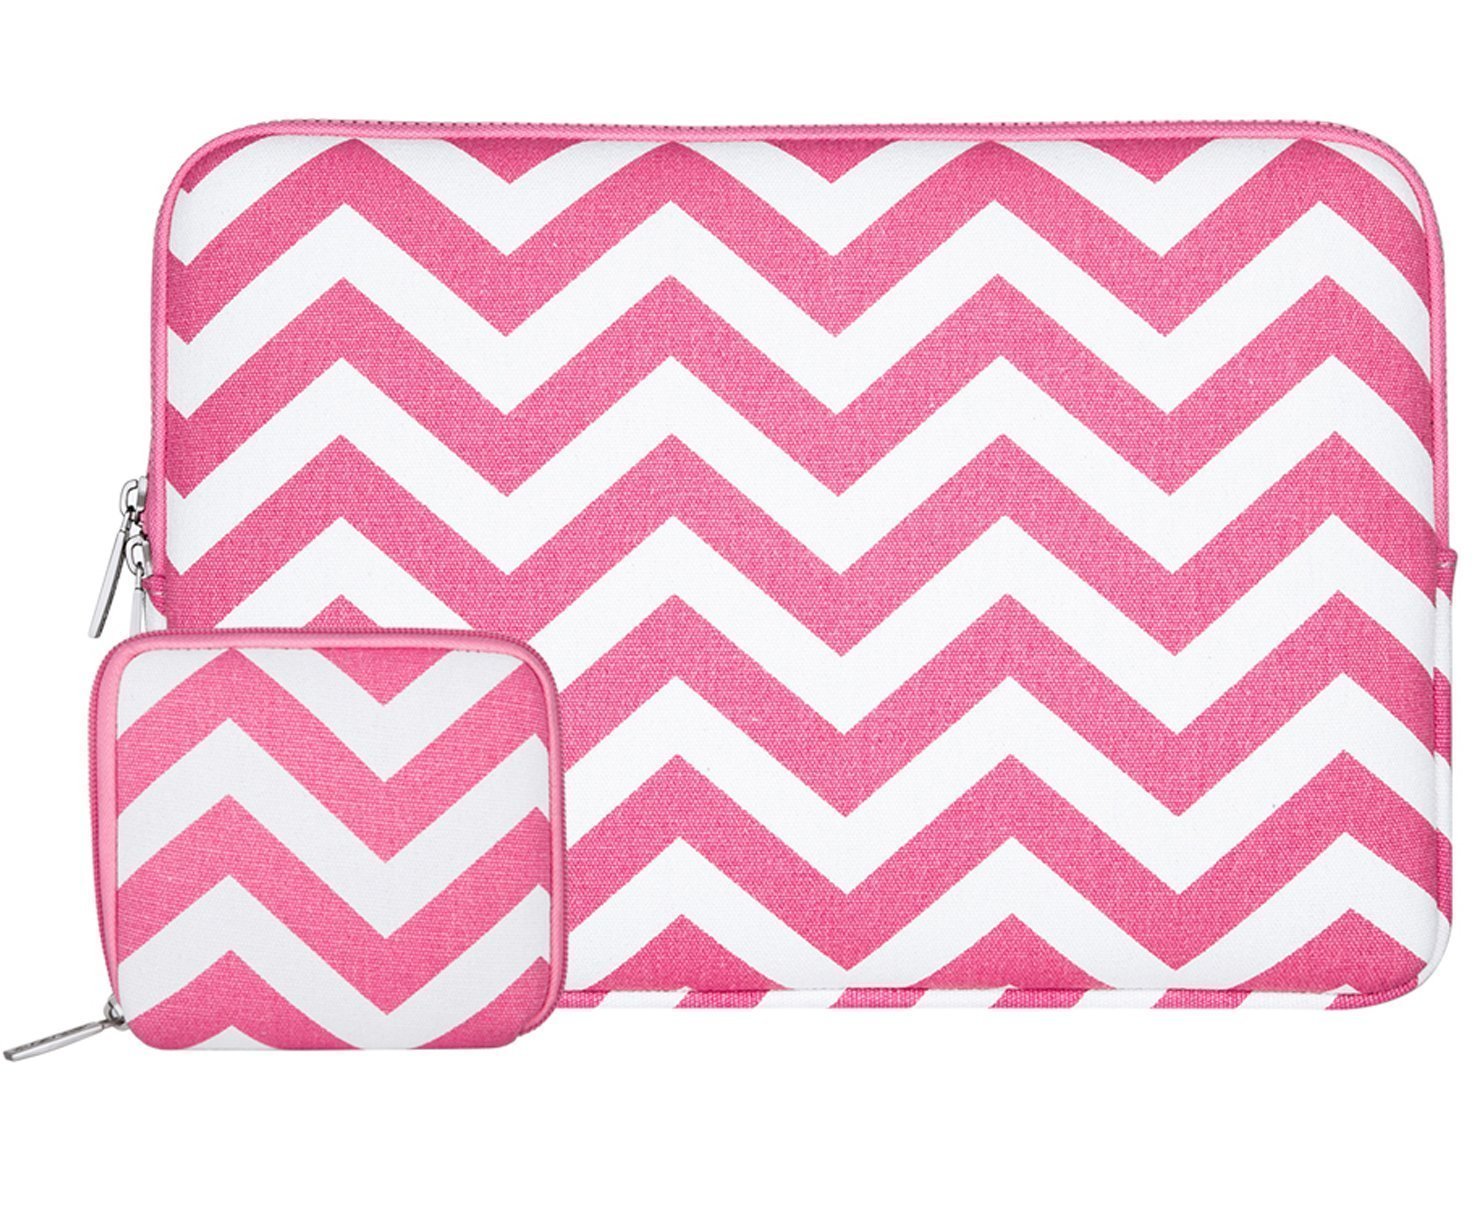 MOSISO Laptop Sleeve Bag Compatible 15-15.6 Inch MacBook Pro, Notebook Computer with Small Case, Chevron Style Canvas Fabric Protective Carrying Case Cover, Rose Red